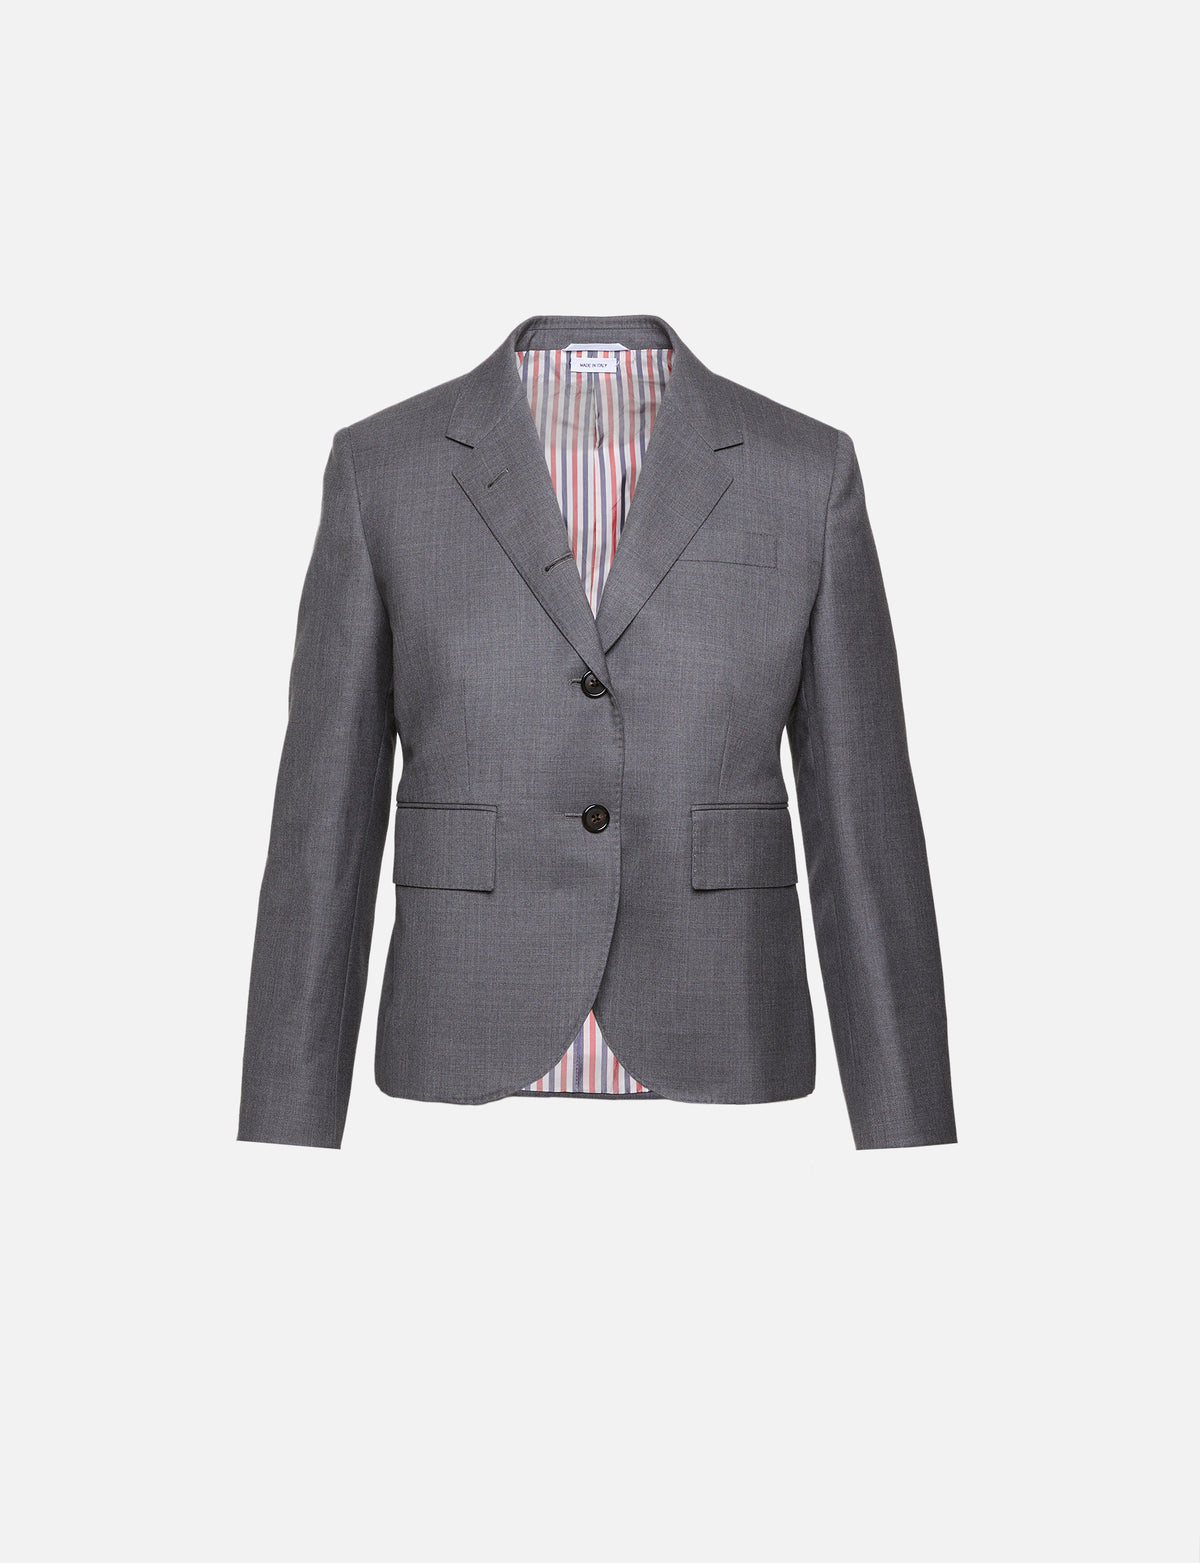 view 1 - High Arm Hole Sport Coat